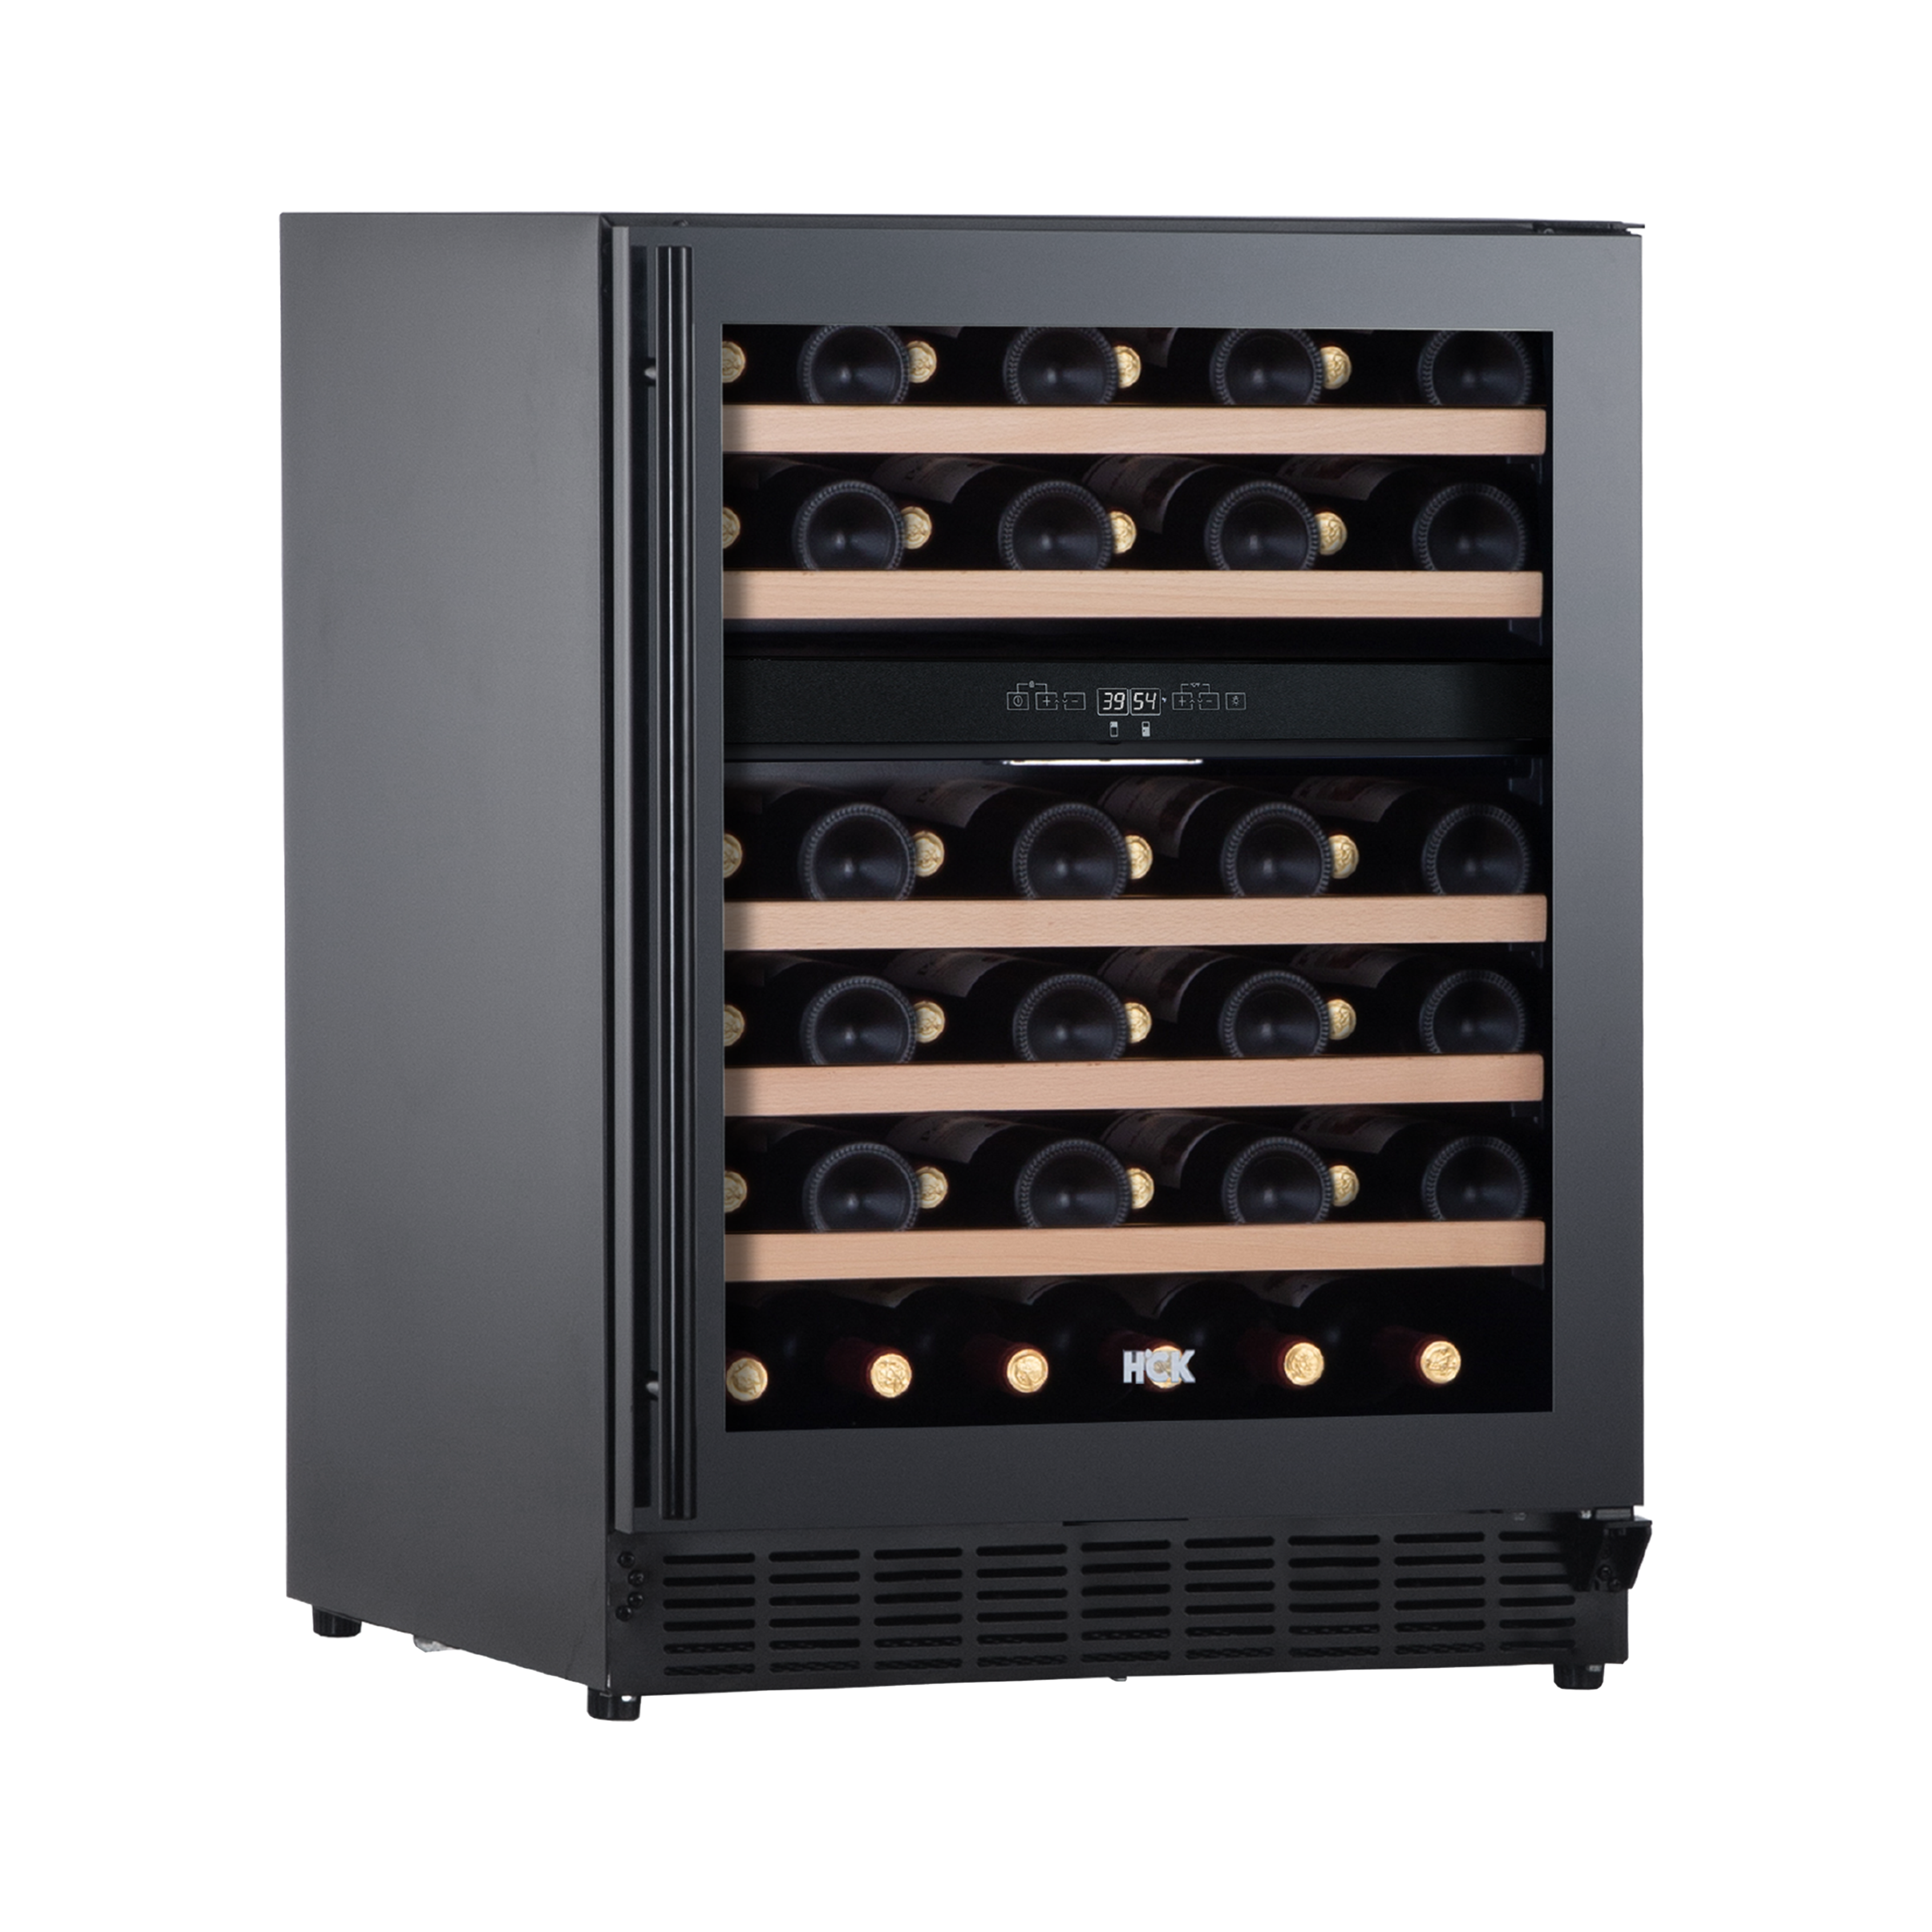 Side view of a 4.5 Cu Ft Black Dual Zone Wine Fridge 46 bottles with a glass door, displaying the digital thermostat, temperature control panel, and wine bottles inside